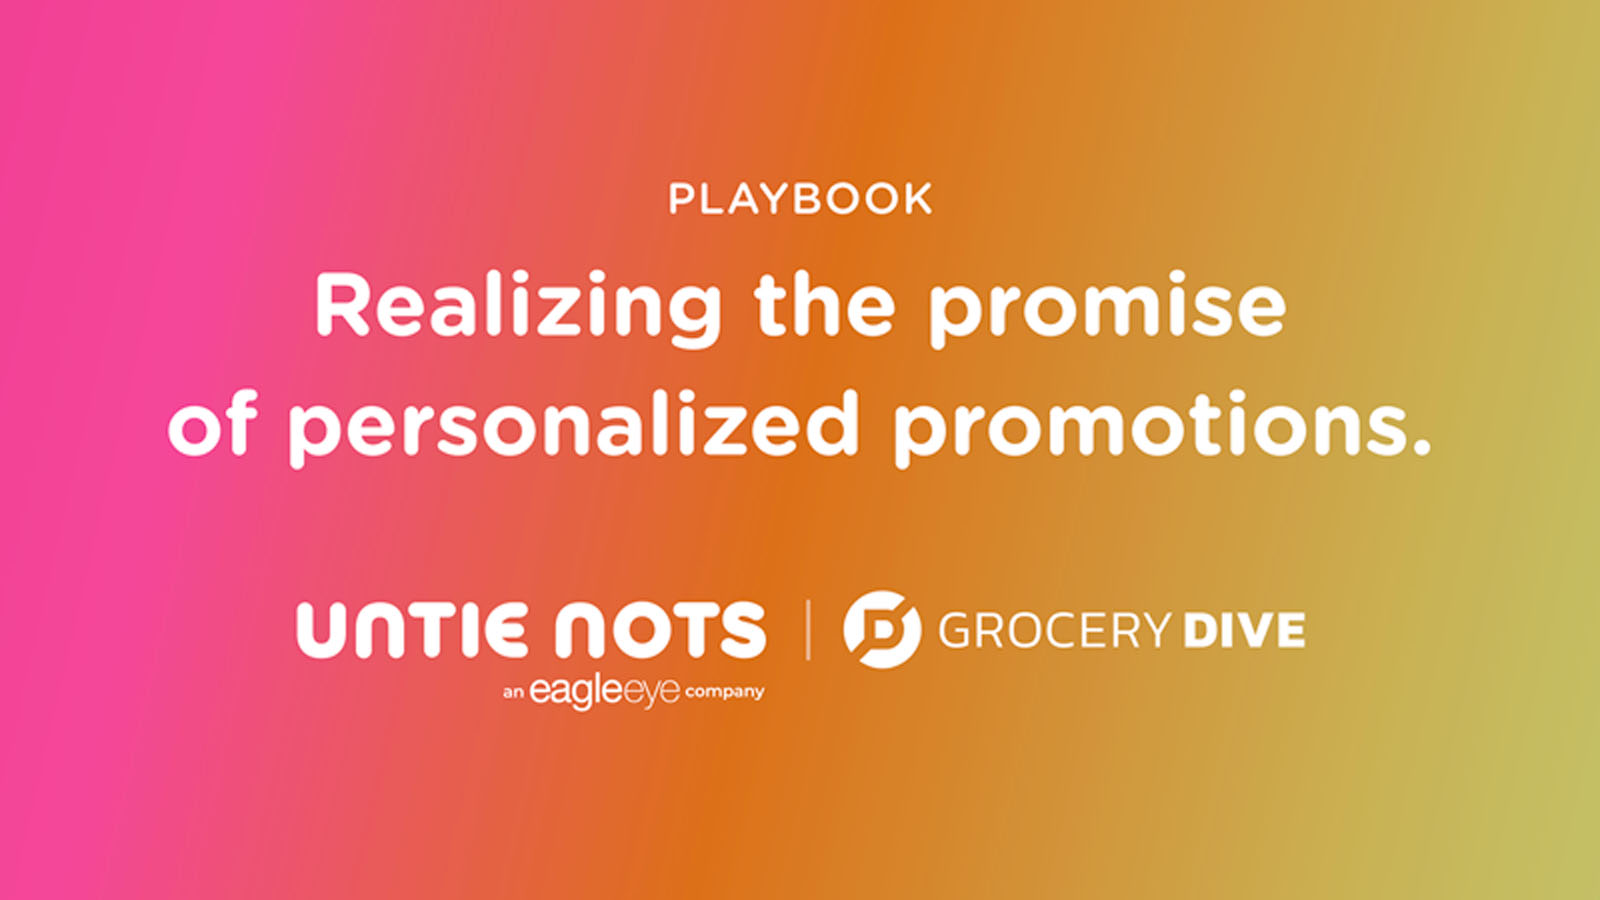 Realizing the promise of personalized promotions